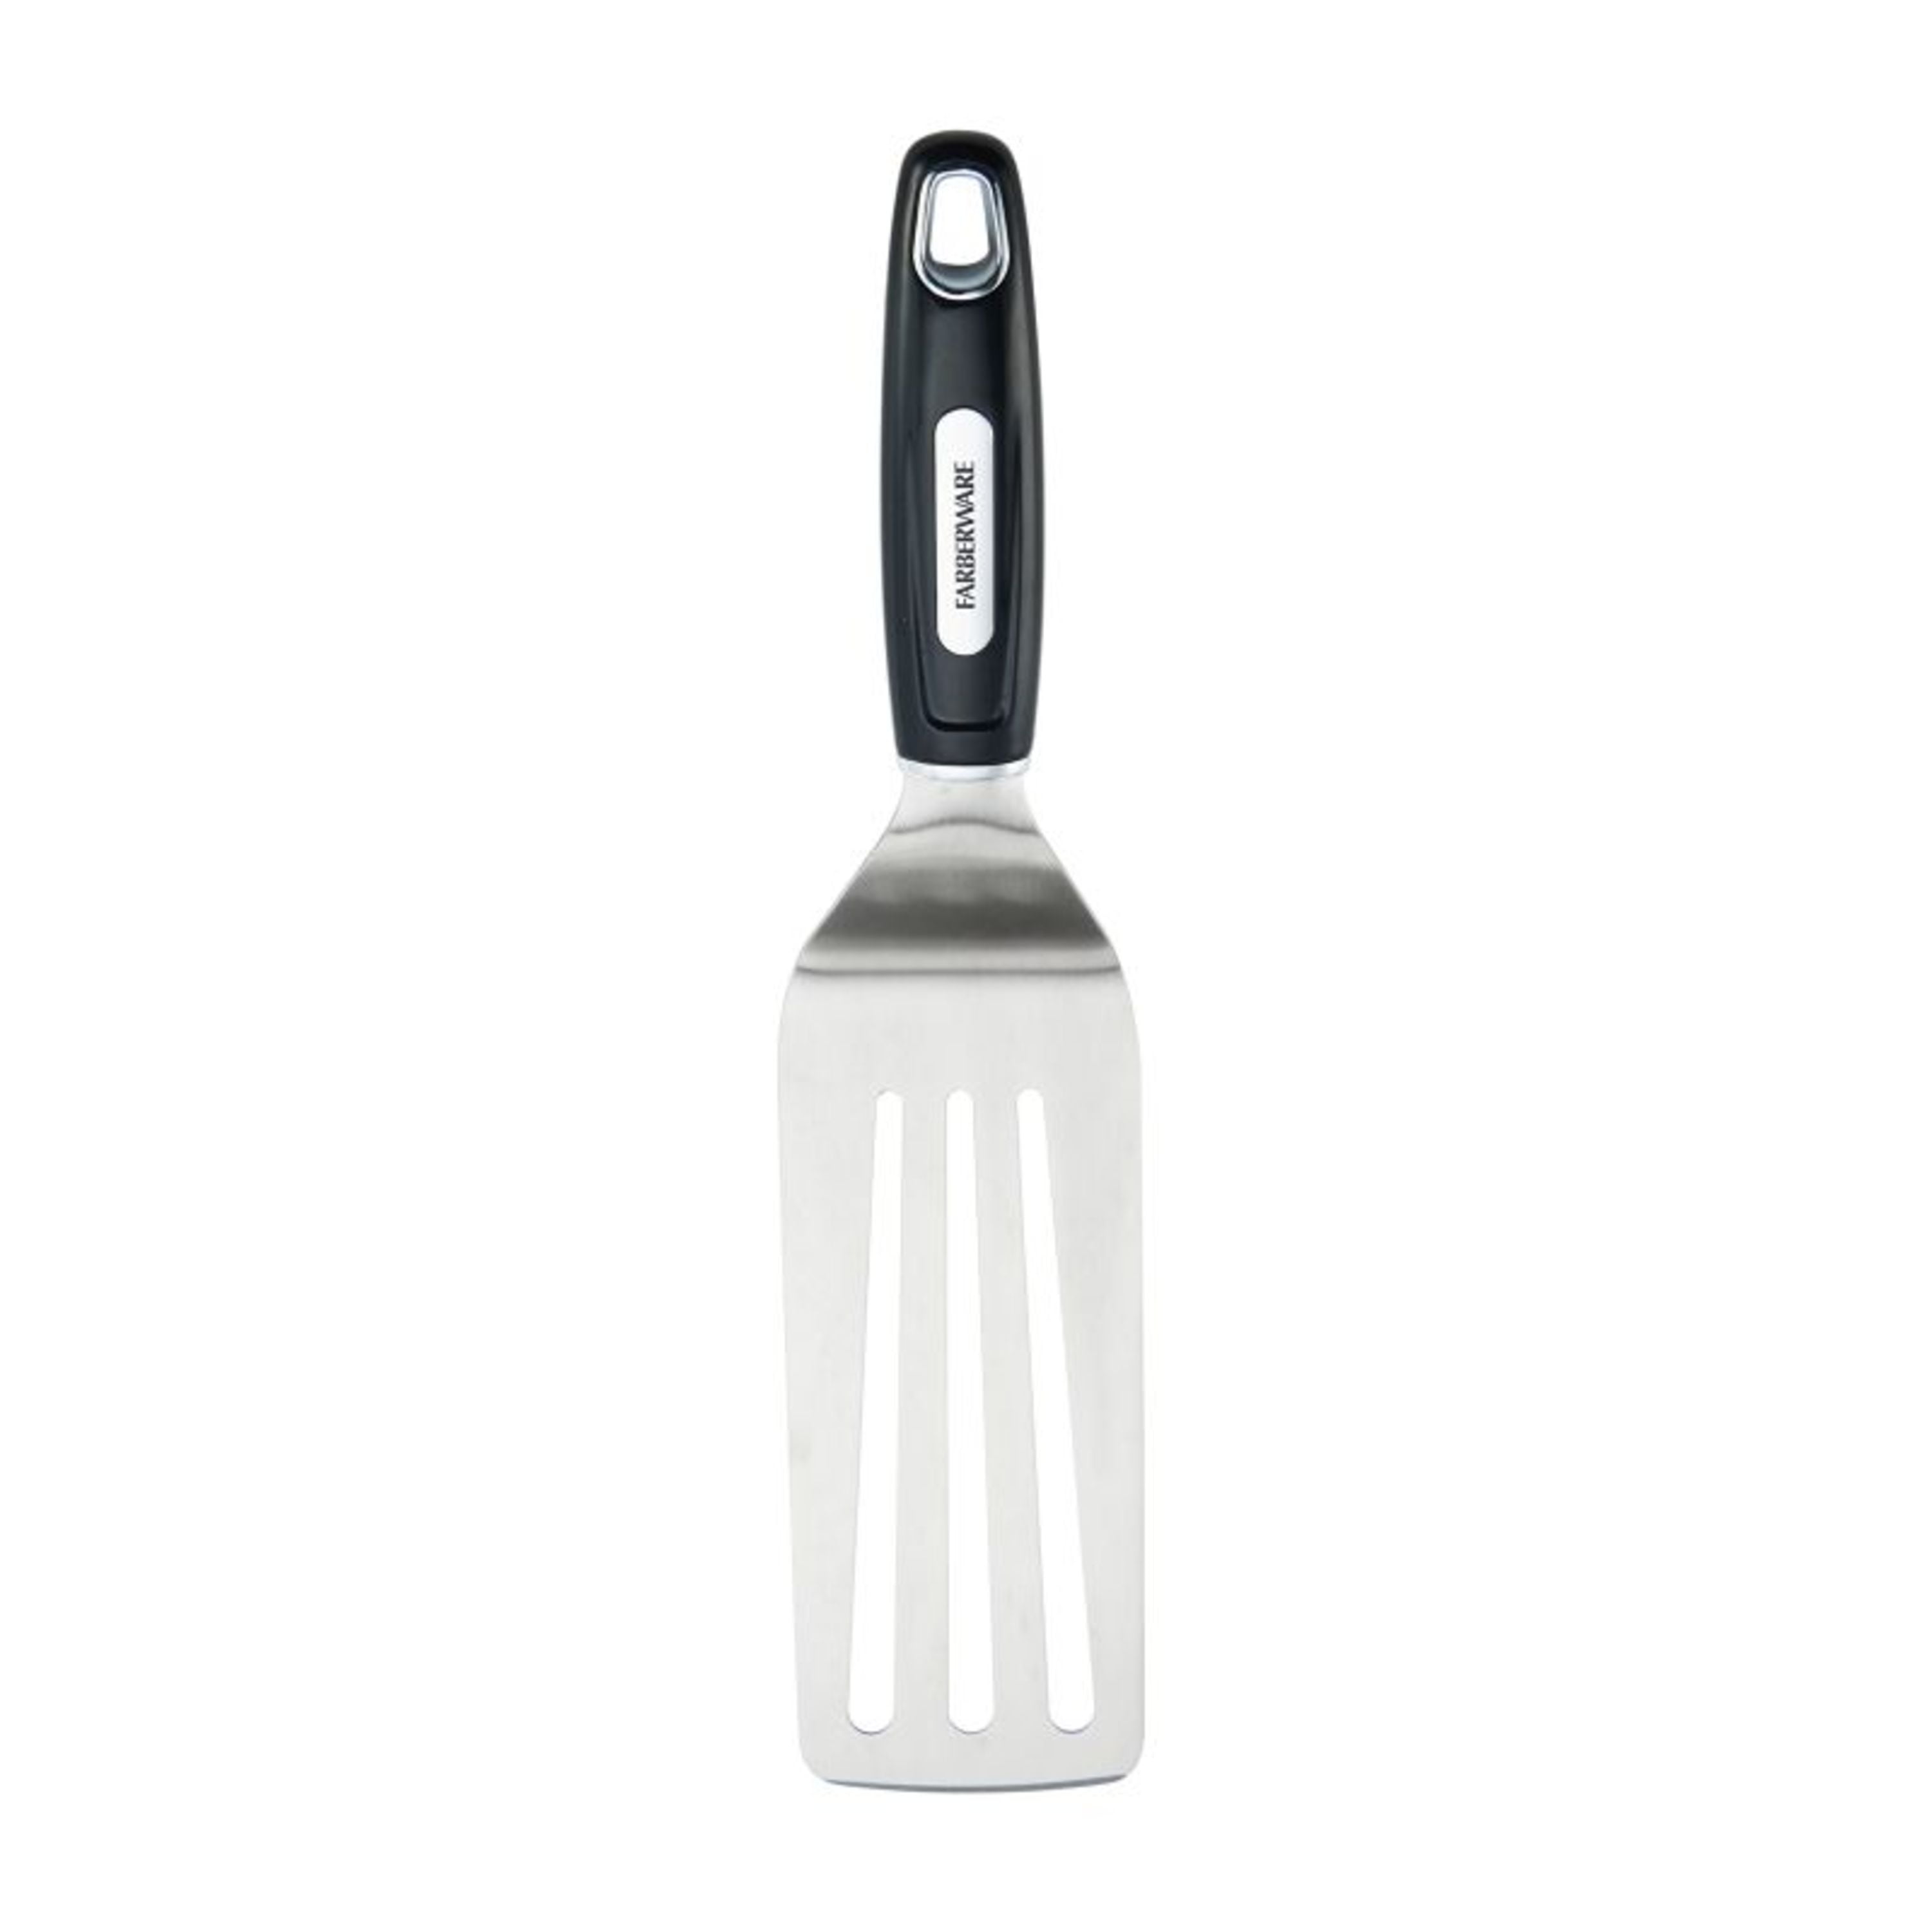 Farberware Professional Restaurant Spatula/Turner with Stainless